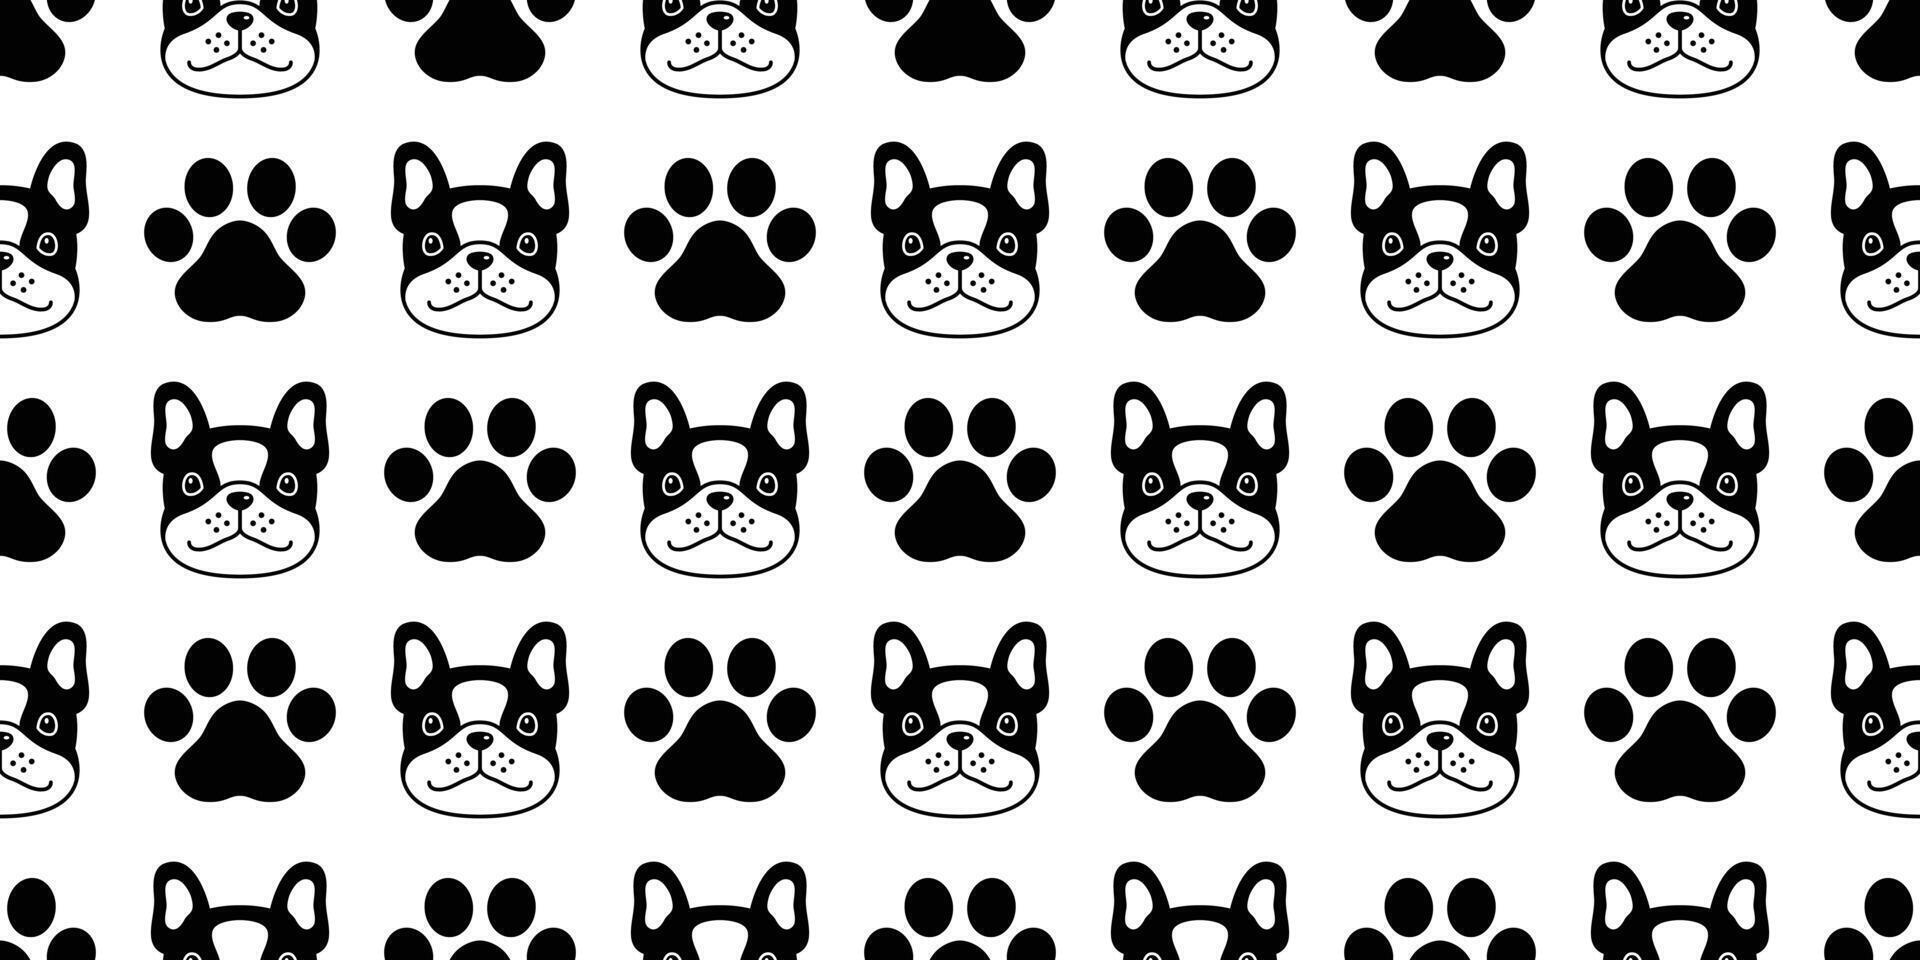 dog seamless pattern french bulldog vector paw footprint face head pet puppy animal scarf isolated repeat wallpaper tile background cartoon doodle illustration design